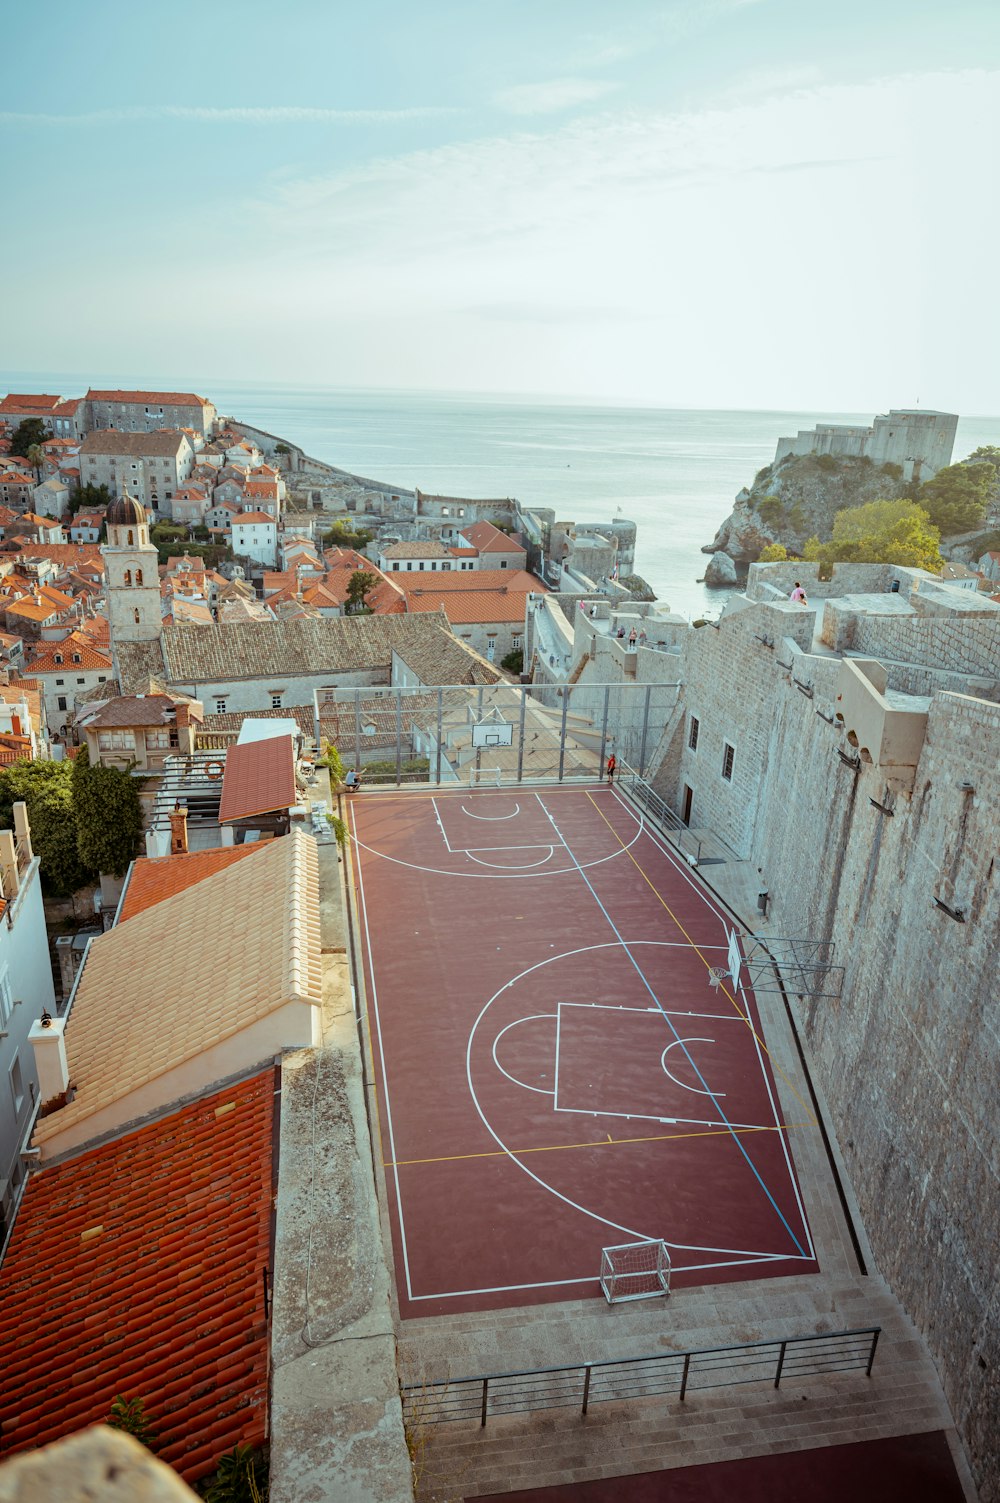 an aerial view of a basketball court in a city